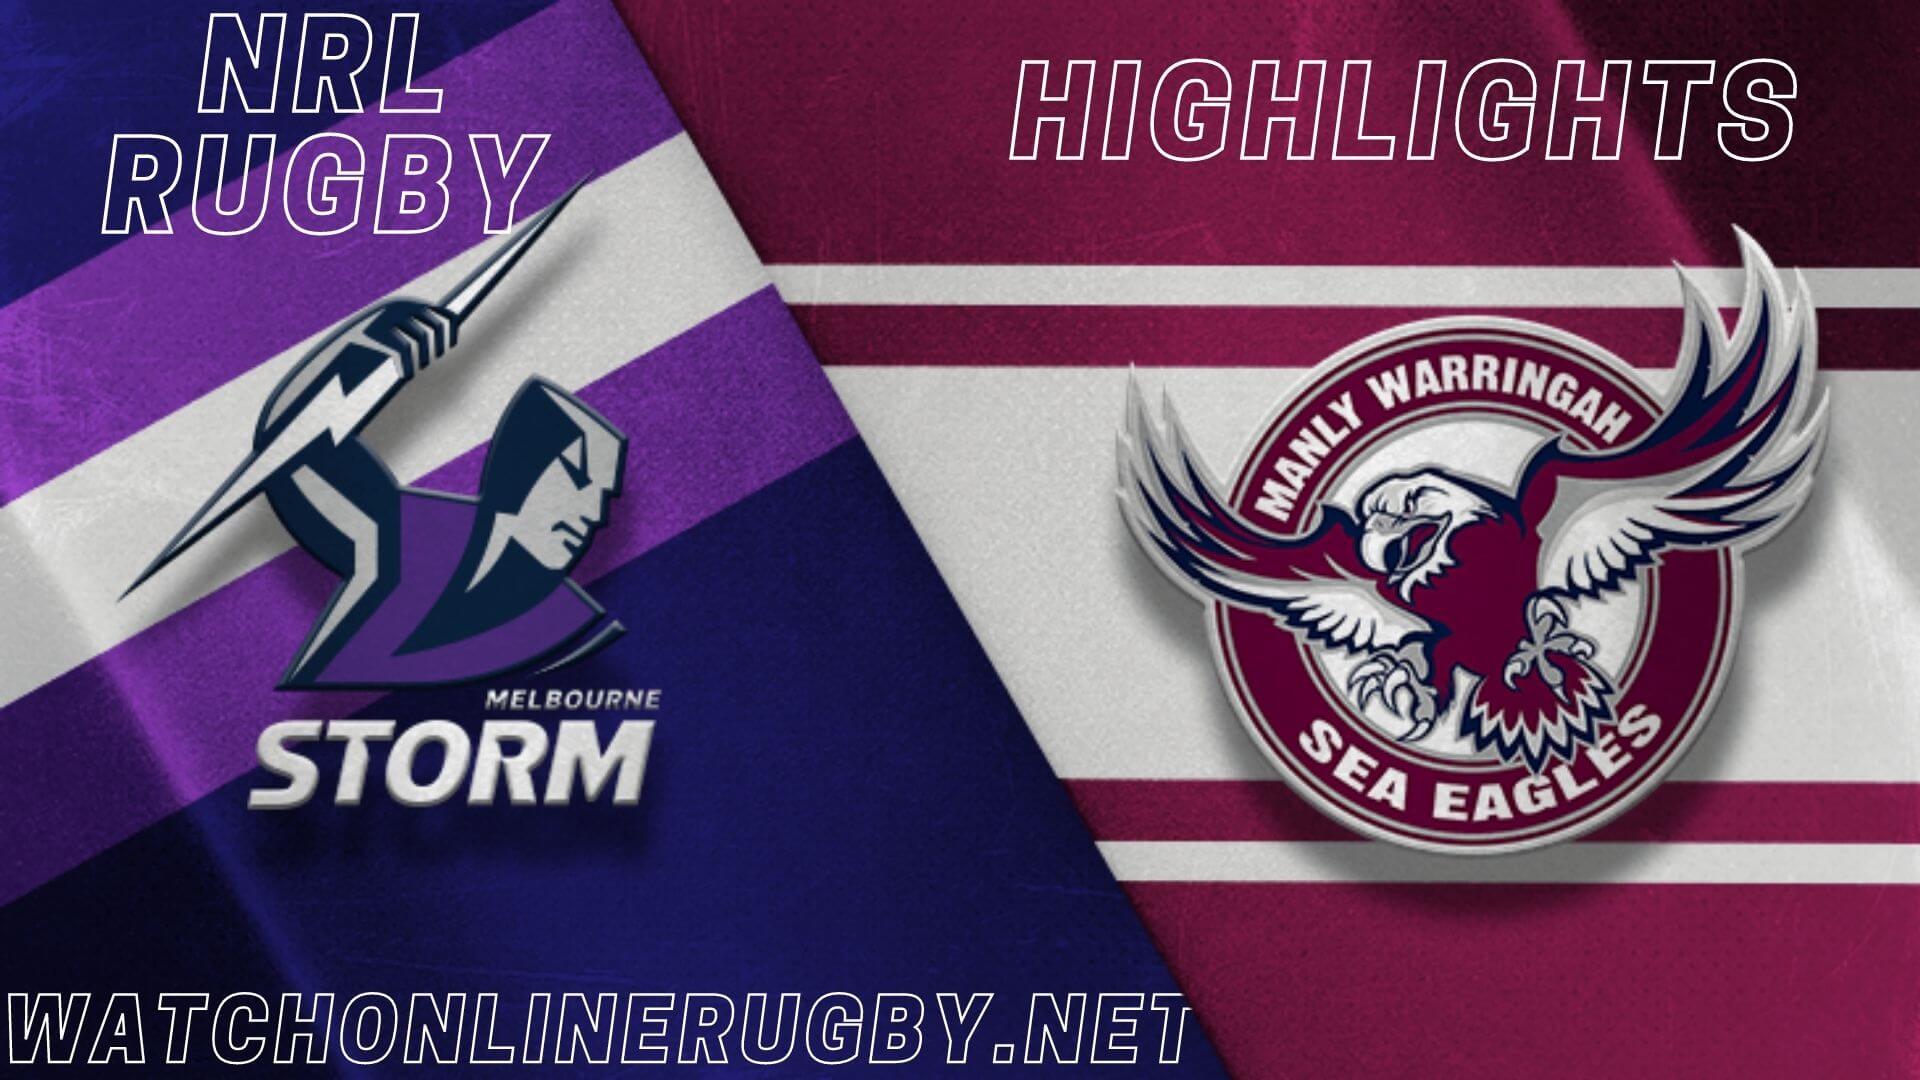 Storm Vs Sea Eagles Highlights RD 12 NRL Rugby